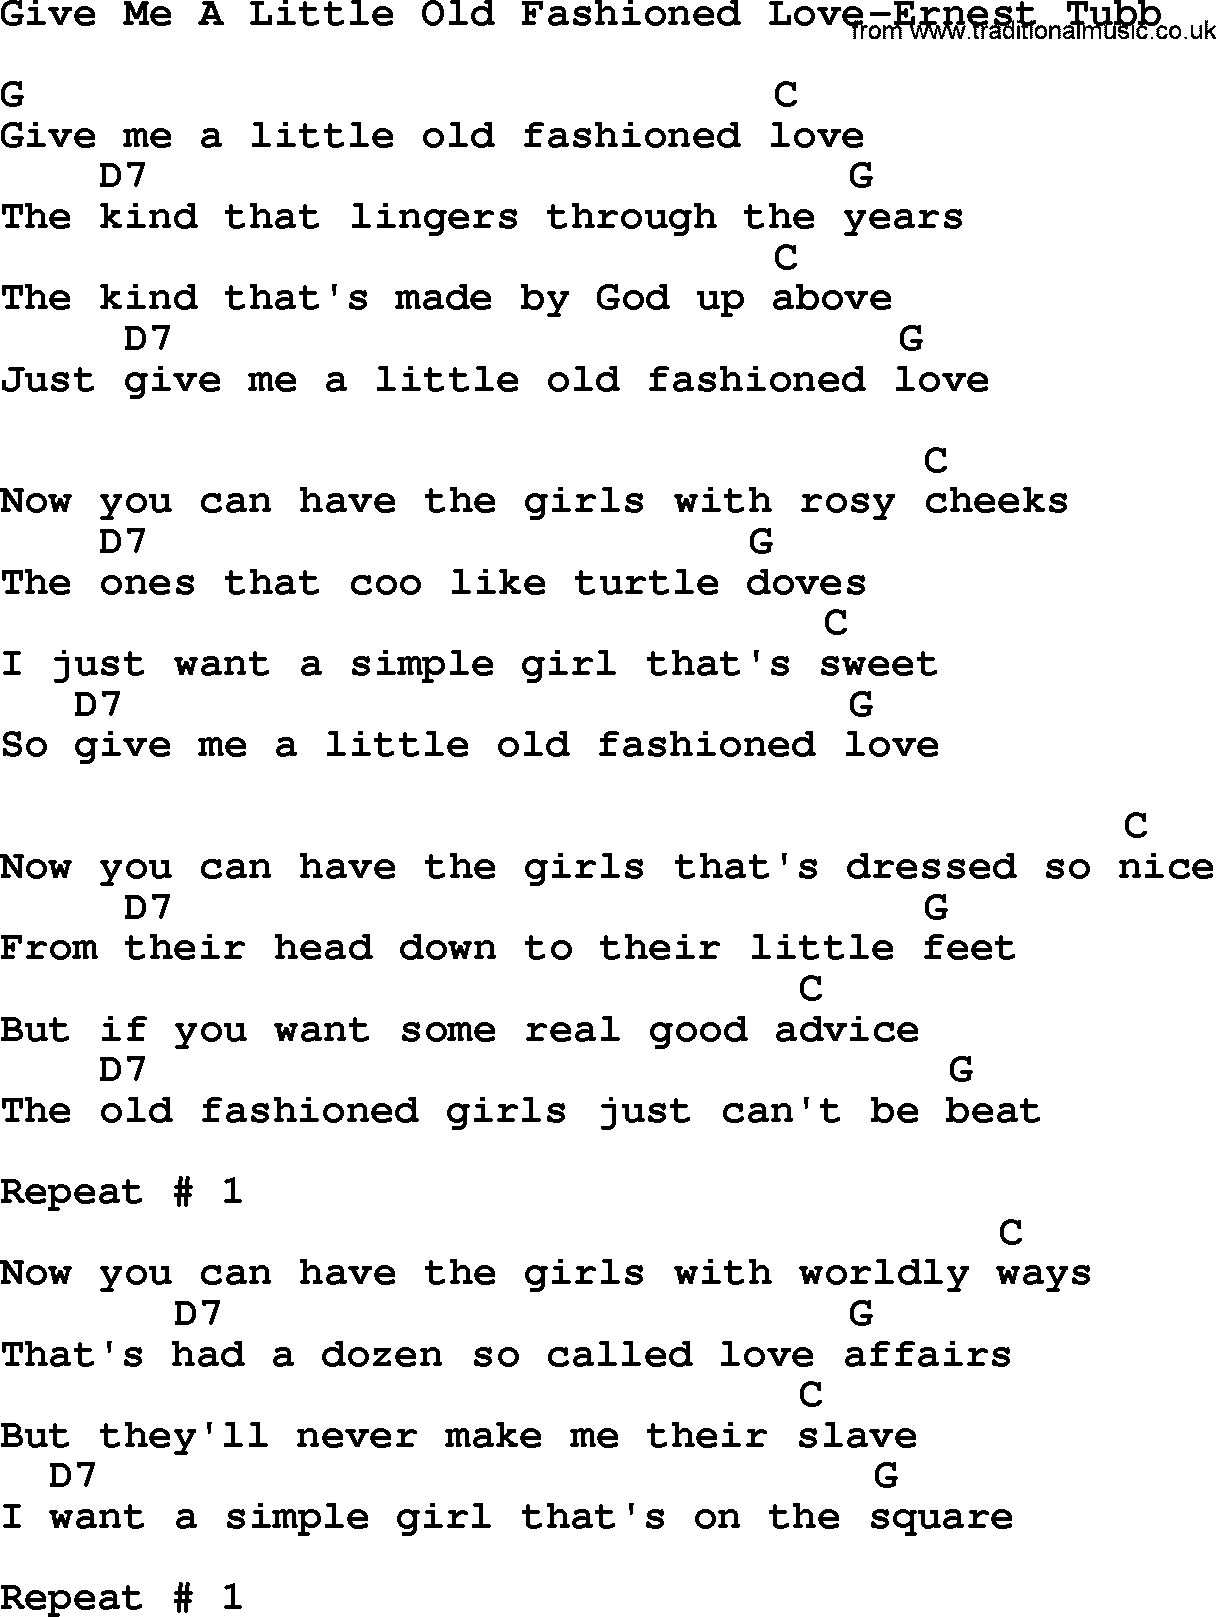 Country music song: Give Me A Little Old Fashioned Love-Ernest Tubb lyrics and chords